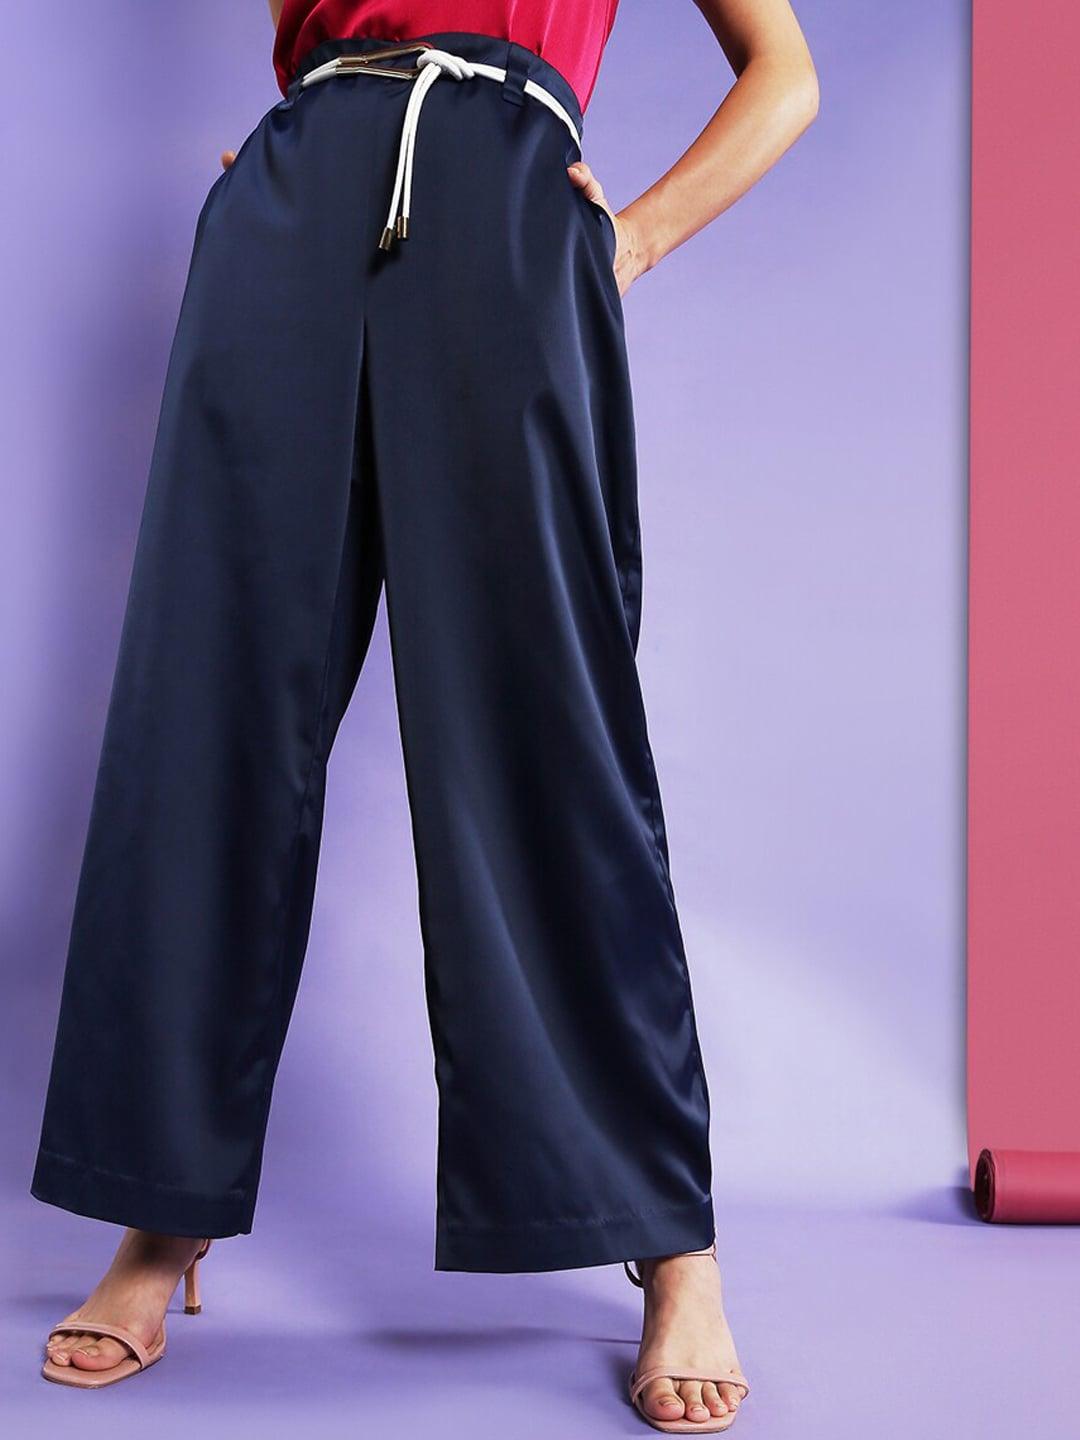 vero-moda-marquee-collection-women-blue-flared-high-rise-trousers